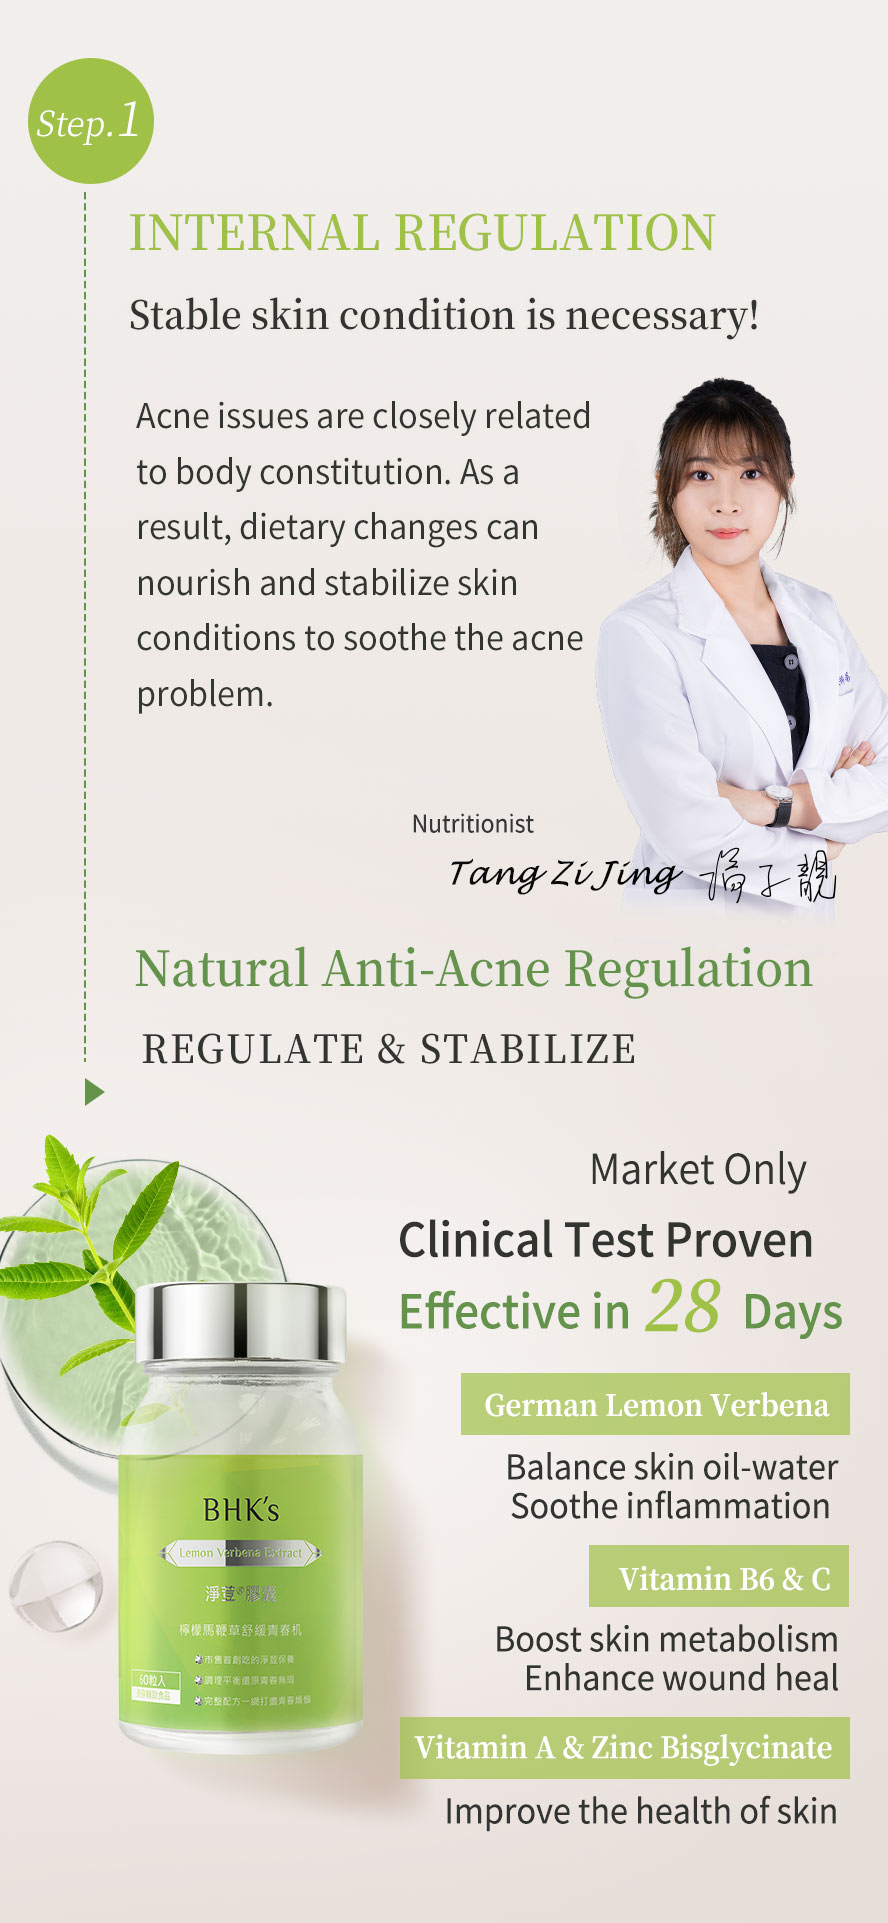 The internal regulation recommended by nutritionist to stabilize skin condition, balance skin oil-water, soothe inflammation, enhance wound healing, and its clinicaly proven it can soothe acne in 28 days.